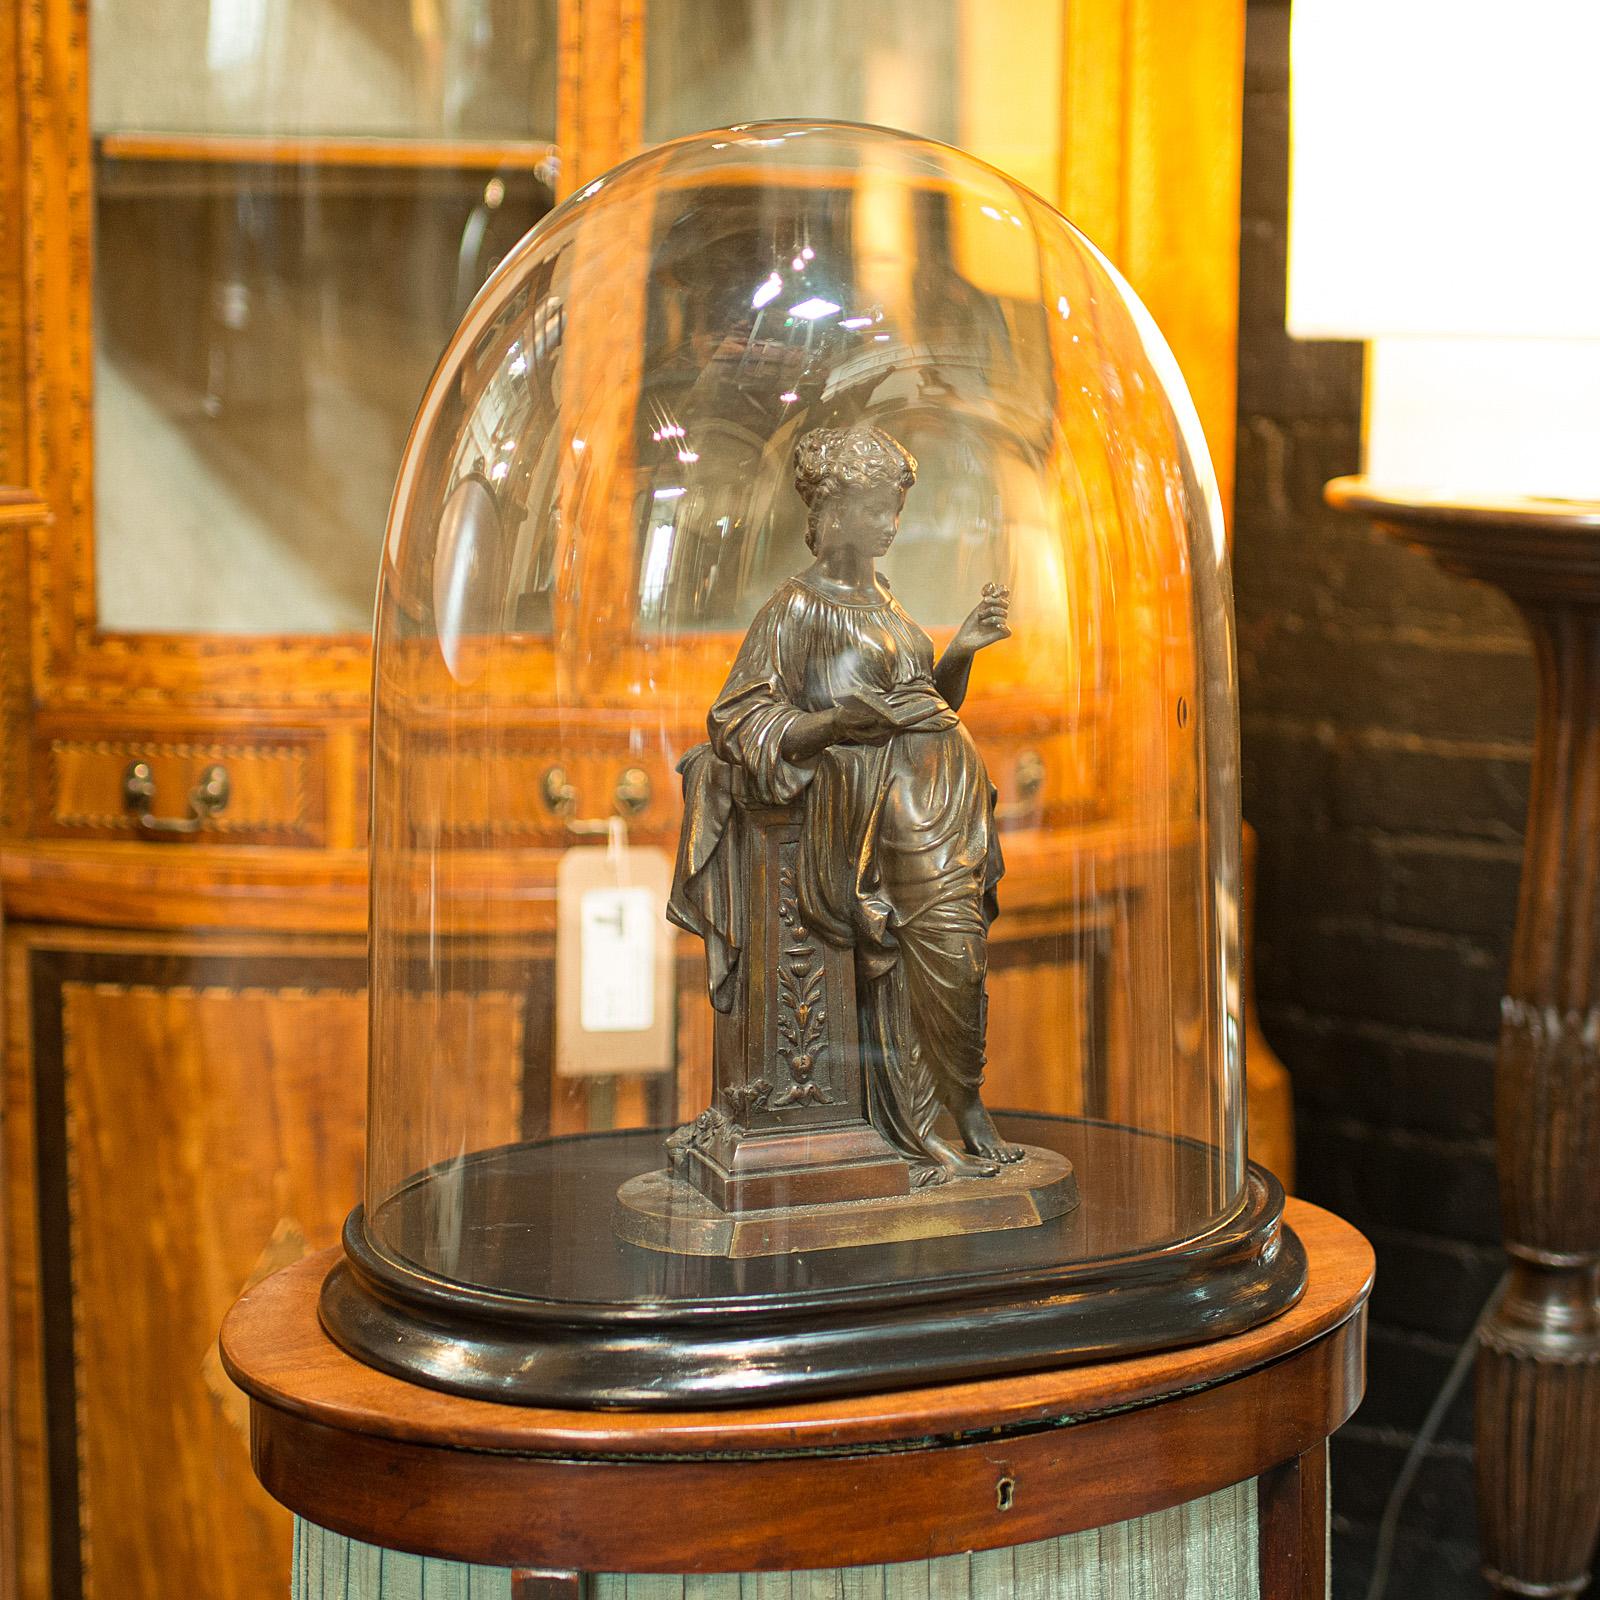 This is a large antique display dome. An English, oval glass showcase upon ebonised pine, dating to the Victorian period, circa 1900.

Of superb proportion and excellent order for age
Displays a desirable aged patina throughout
Oval glass form